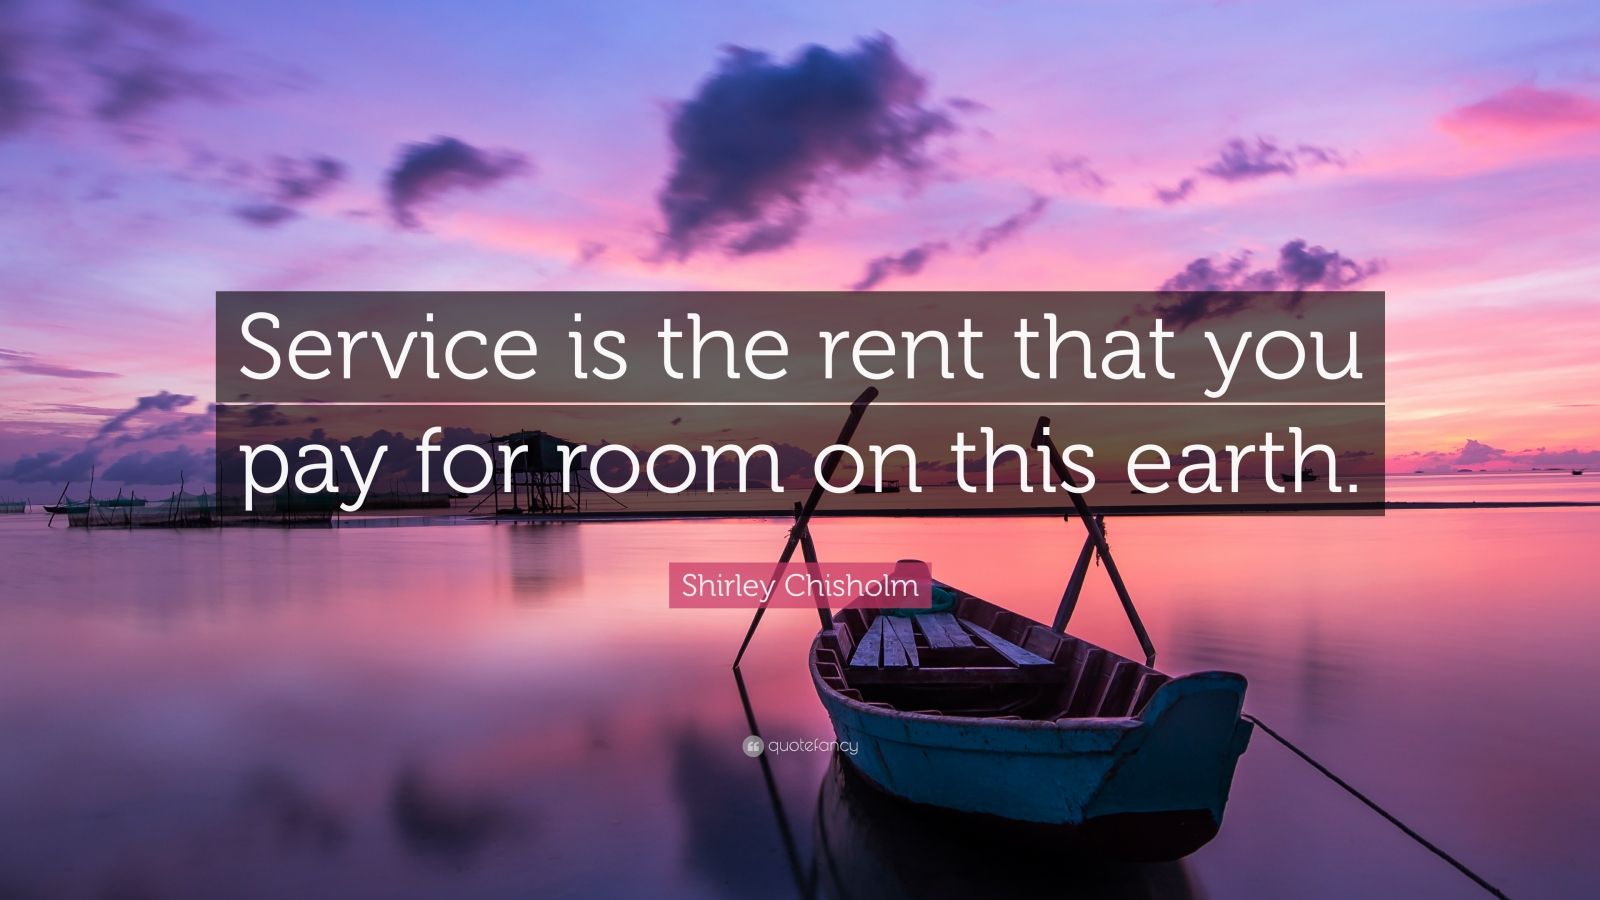 Shirley Chisholm Quote “Service is the rent that you pay for room on